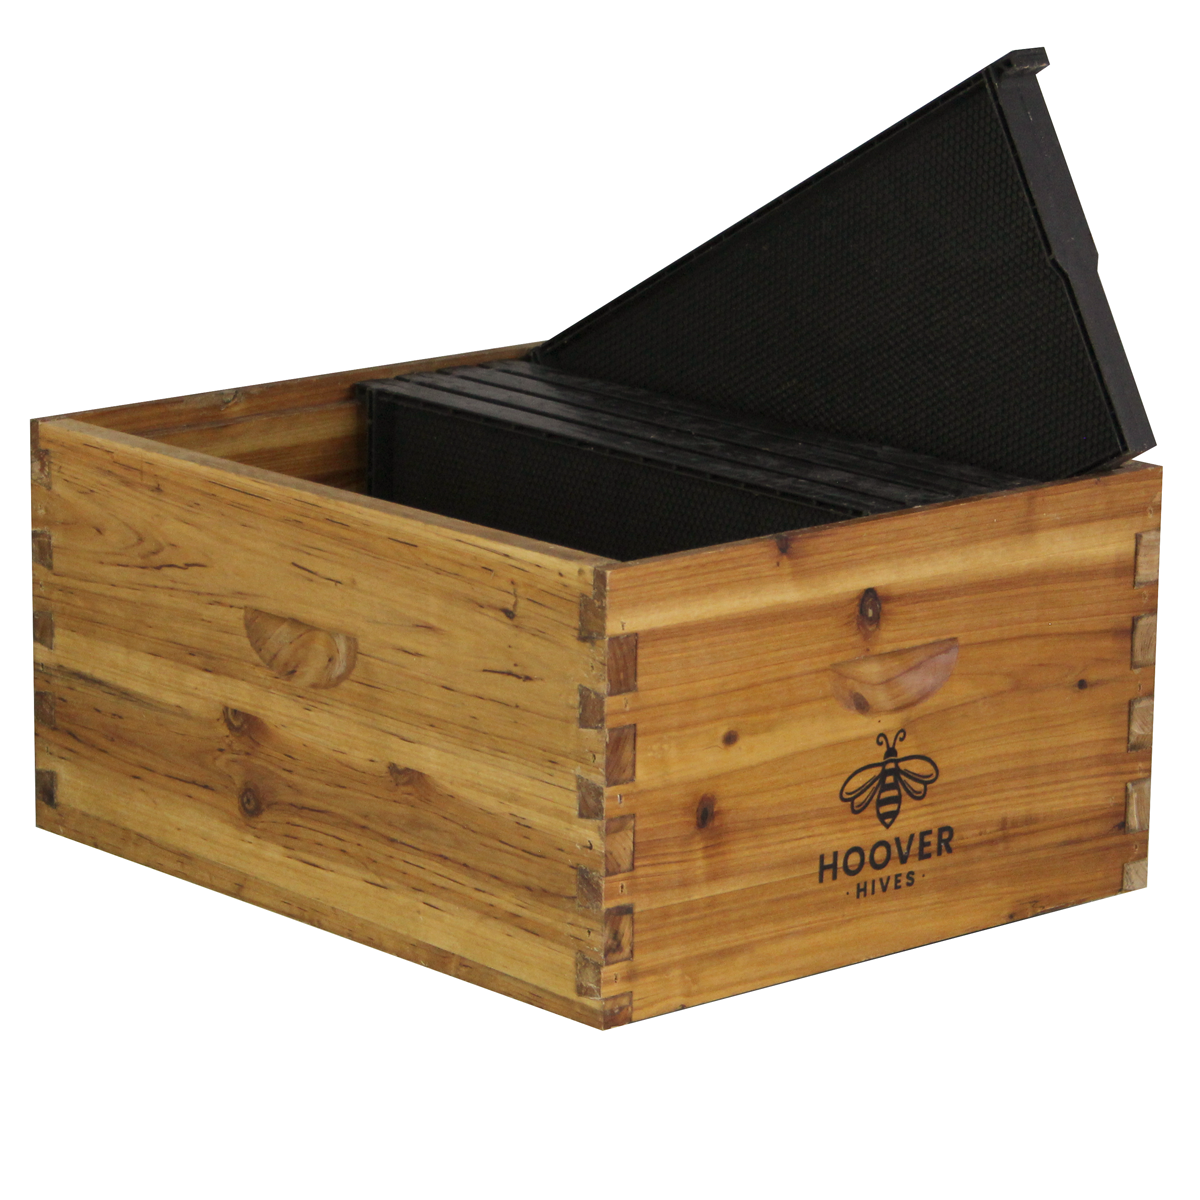 Hoover Hives Wax Coated Deep Brood Box -Size 10 Frame, But Is Nuc-Ready So It Comes With 5 Food Grade Black Plastic Frames